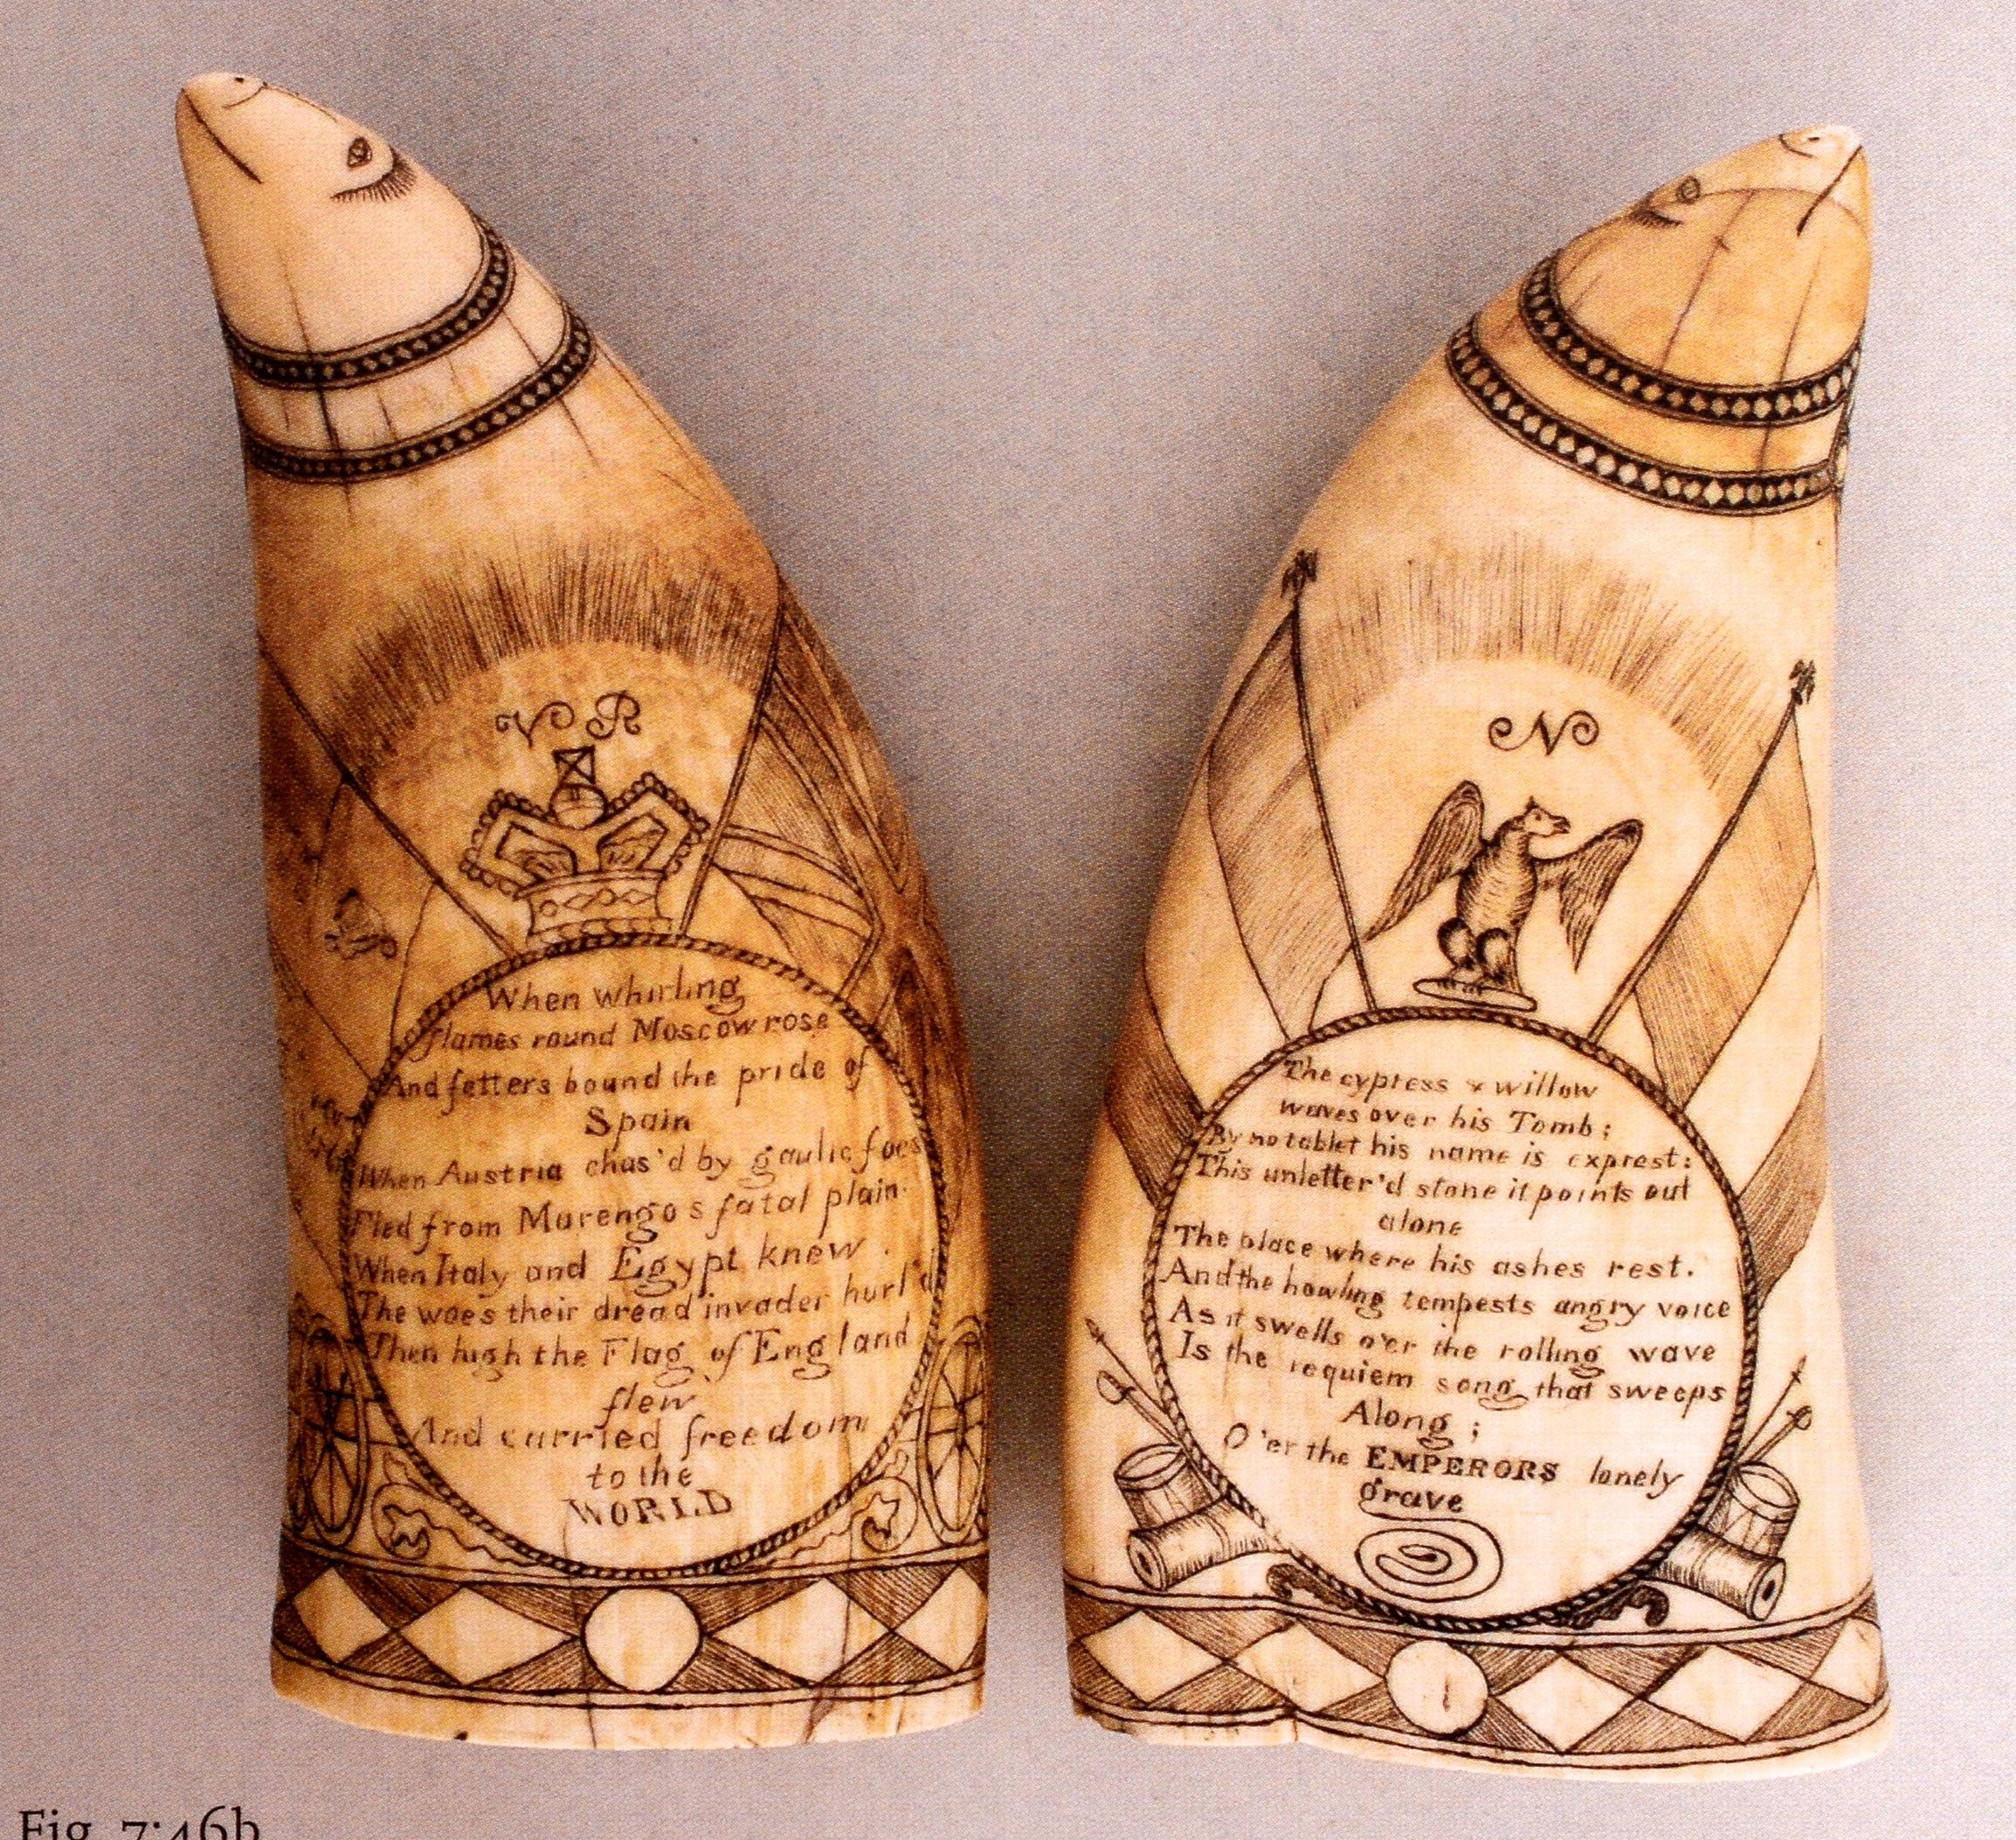 Ingenious Contrivances, Curiously Carved Scrimshaw, New Bedford Whaling Museum For Sale 12